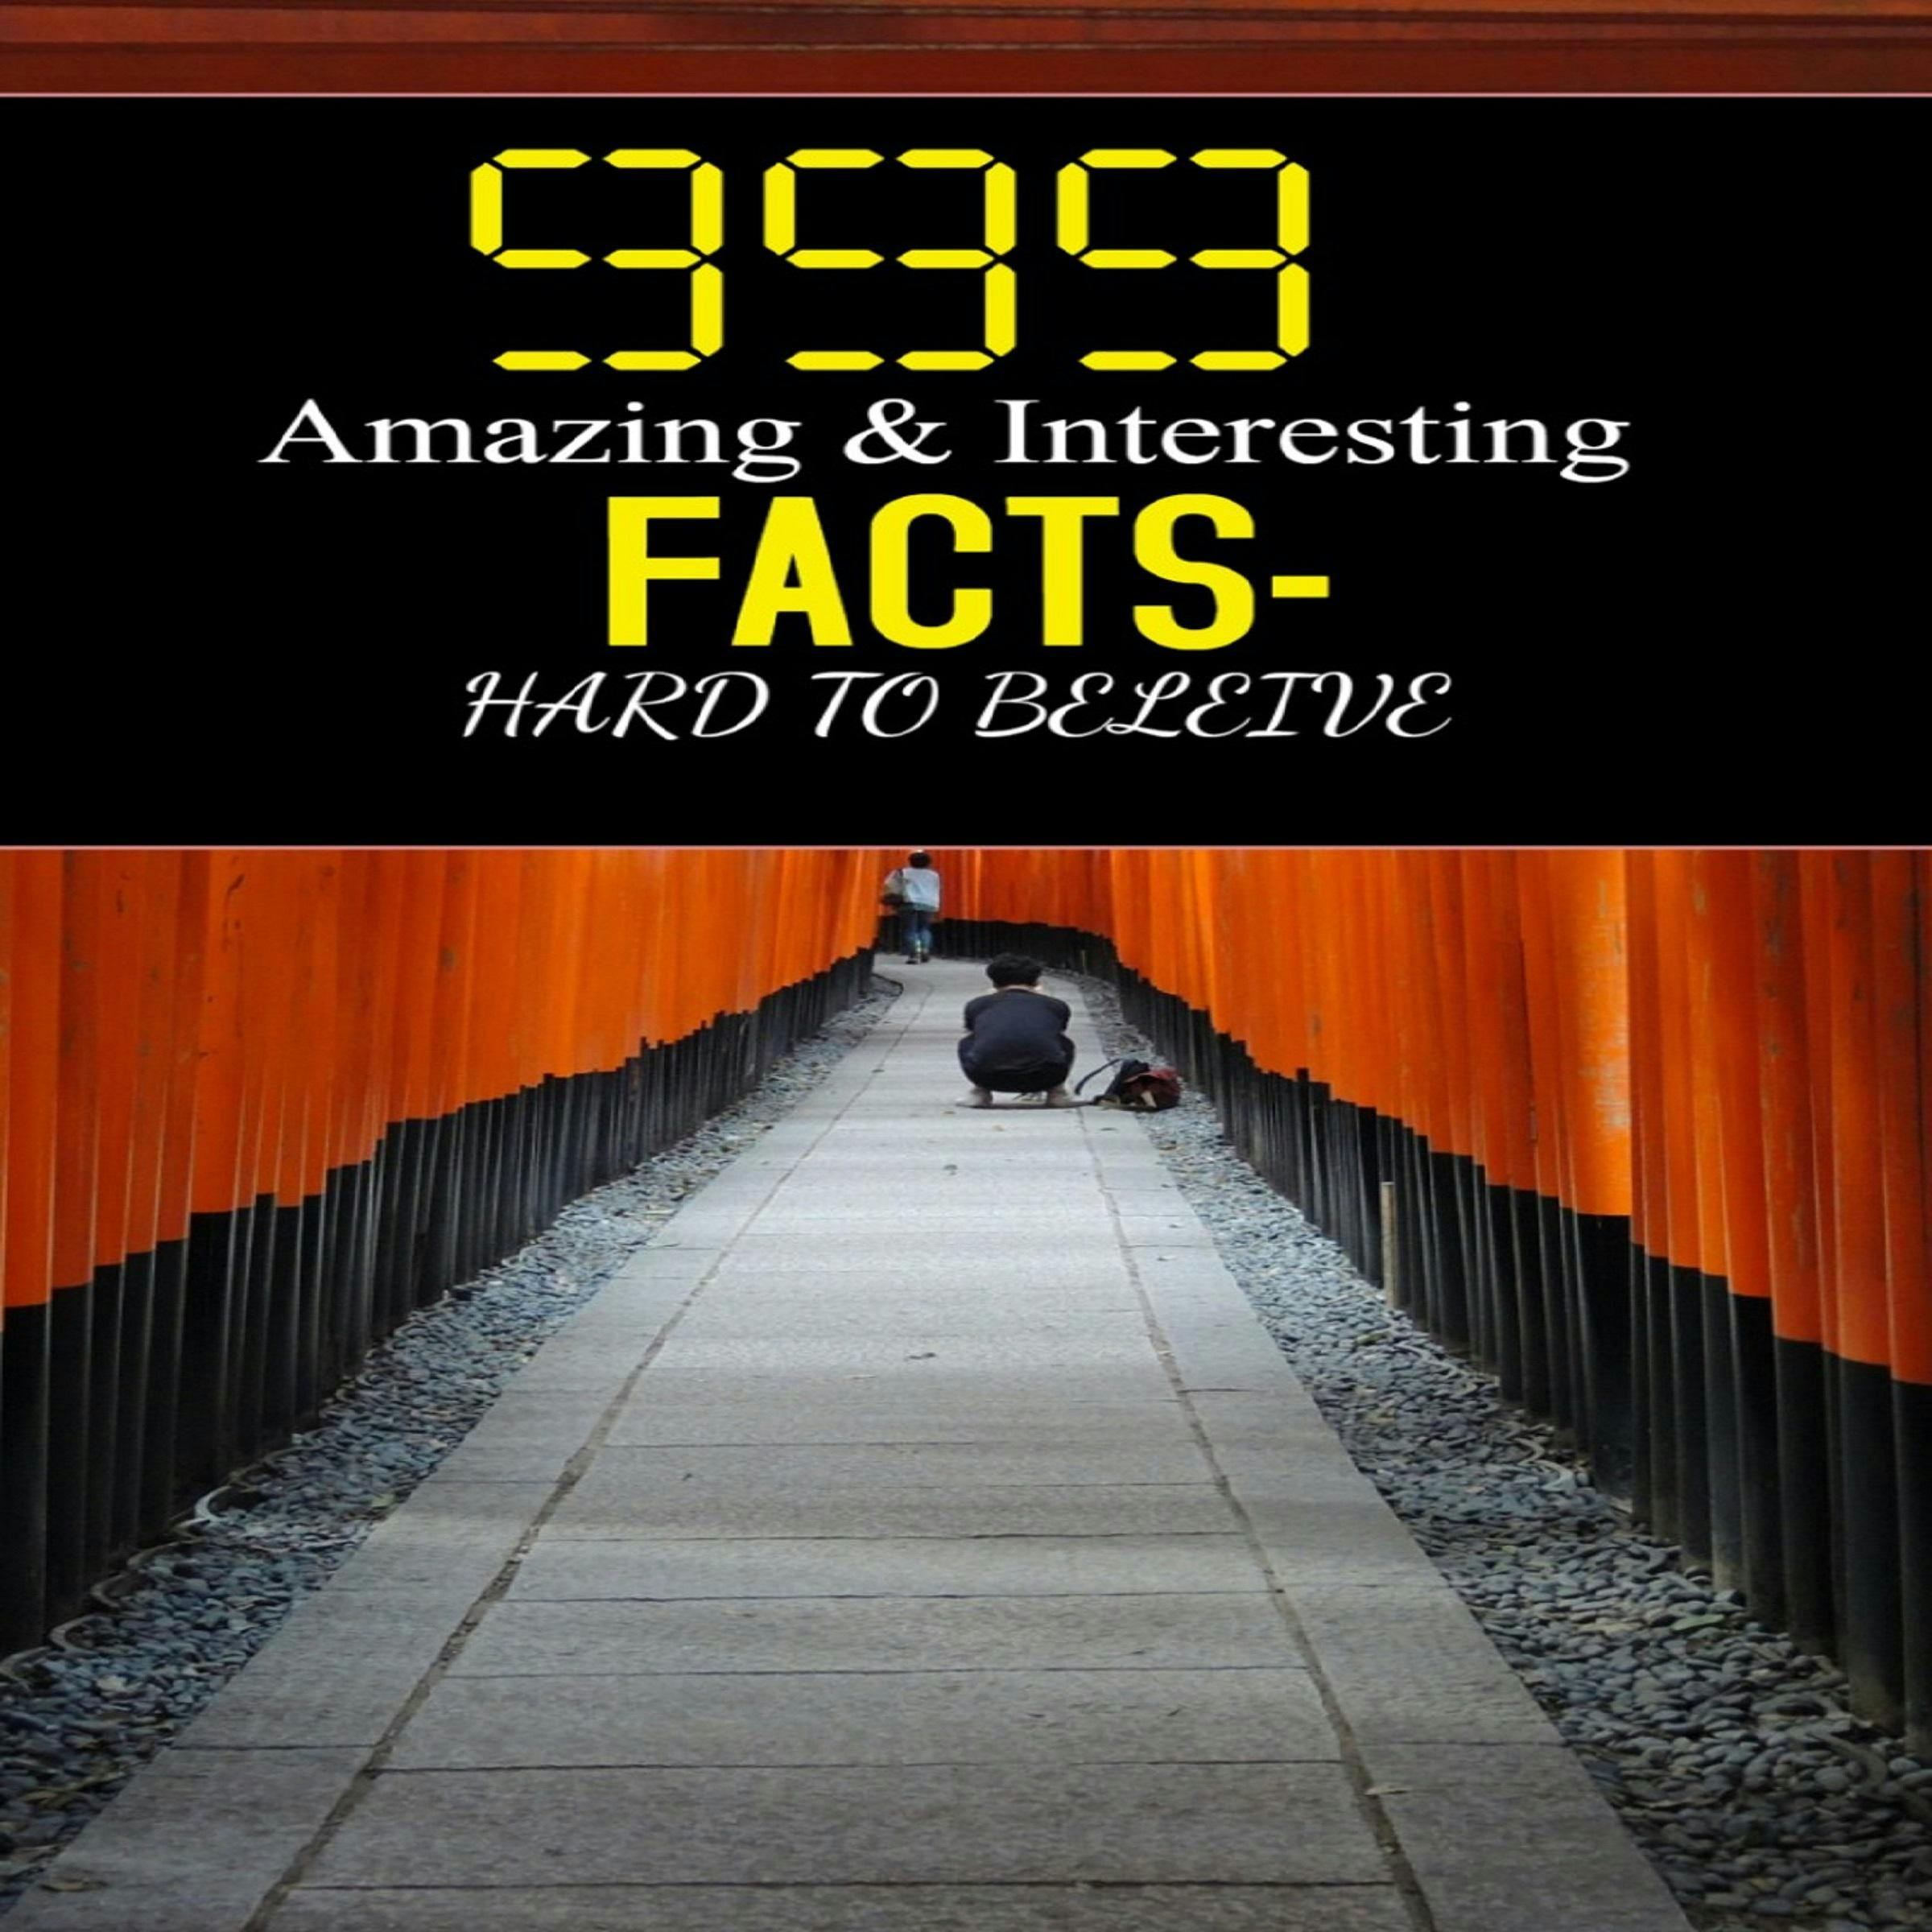 999 Amazing & Interesting Facts: Hard To Believe - undefined